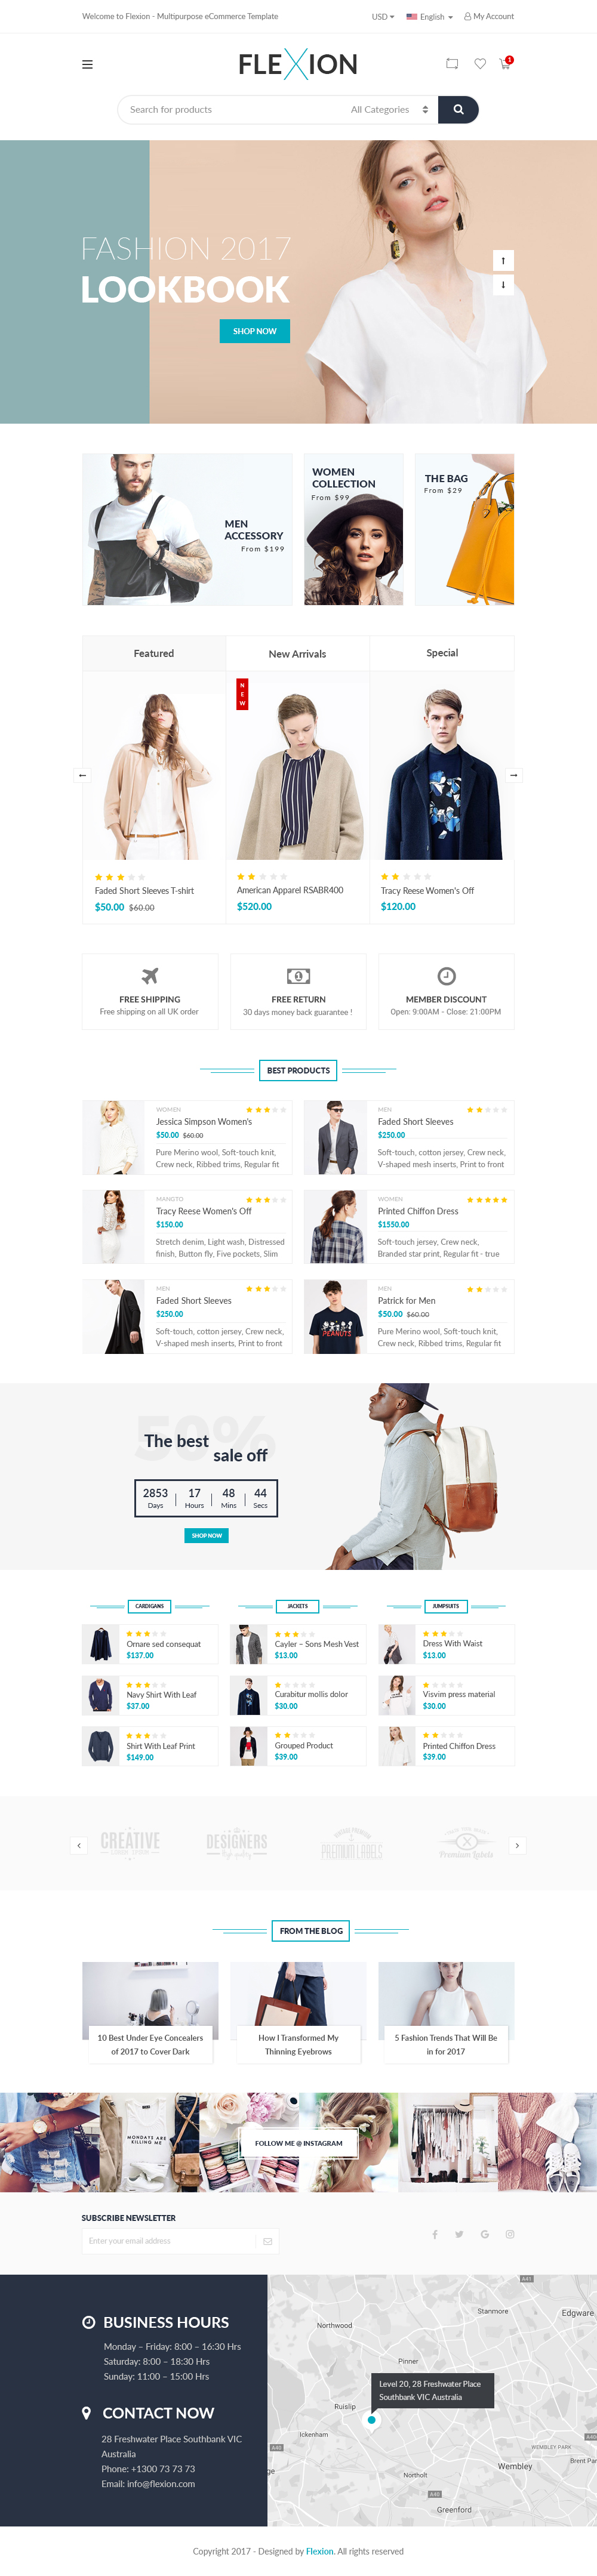 Flexion II - eCommerce & CMS PSD Templates by tvlgiao | ThemeForest